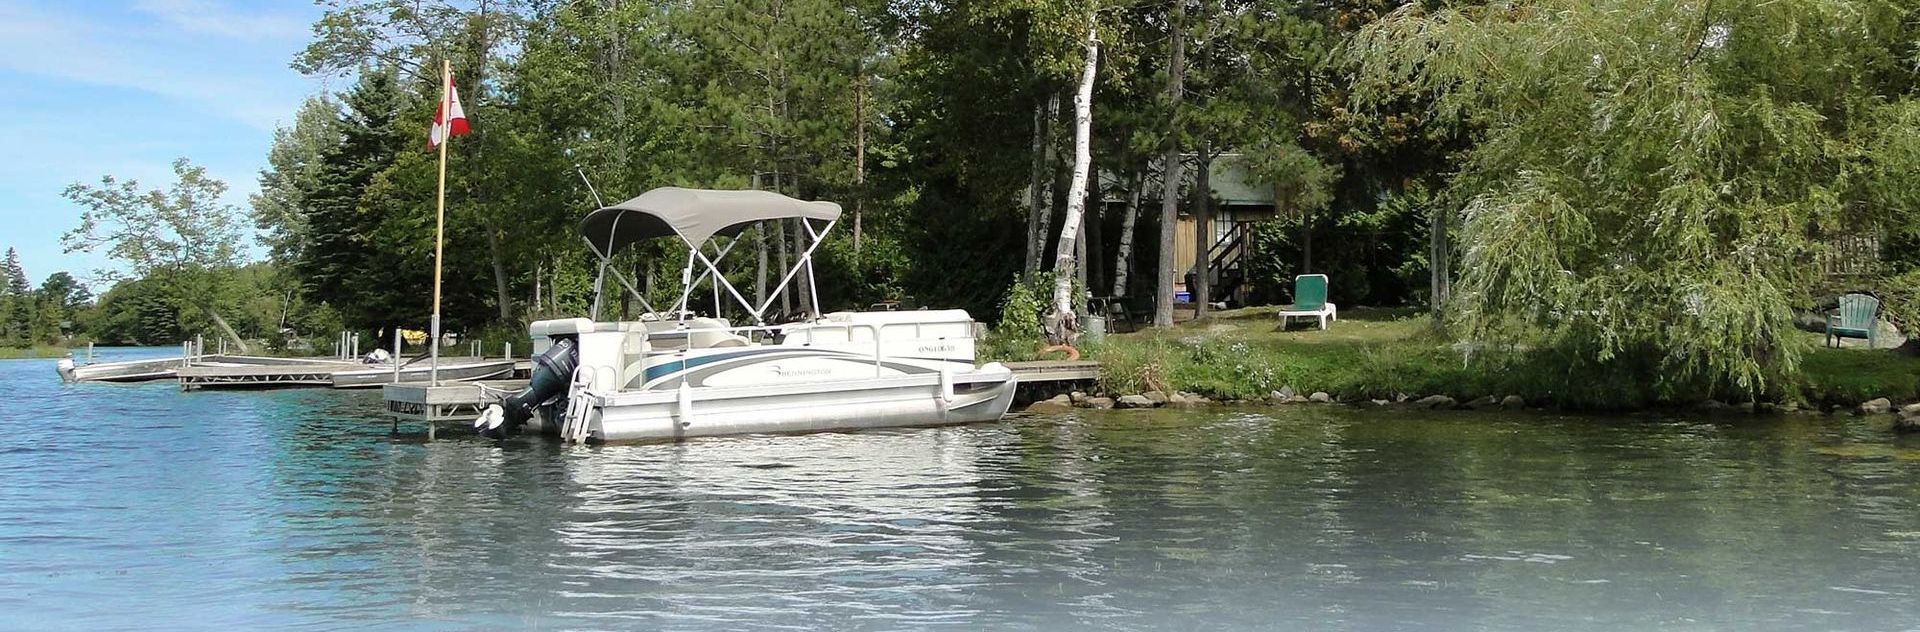 a boat is docked at a dock on a lake surrounded by trees .